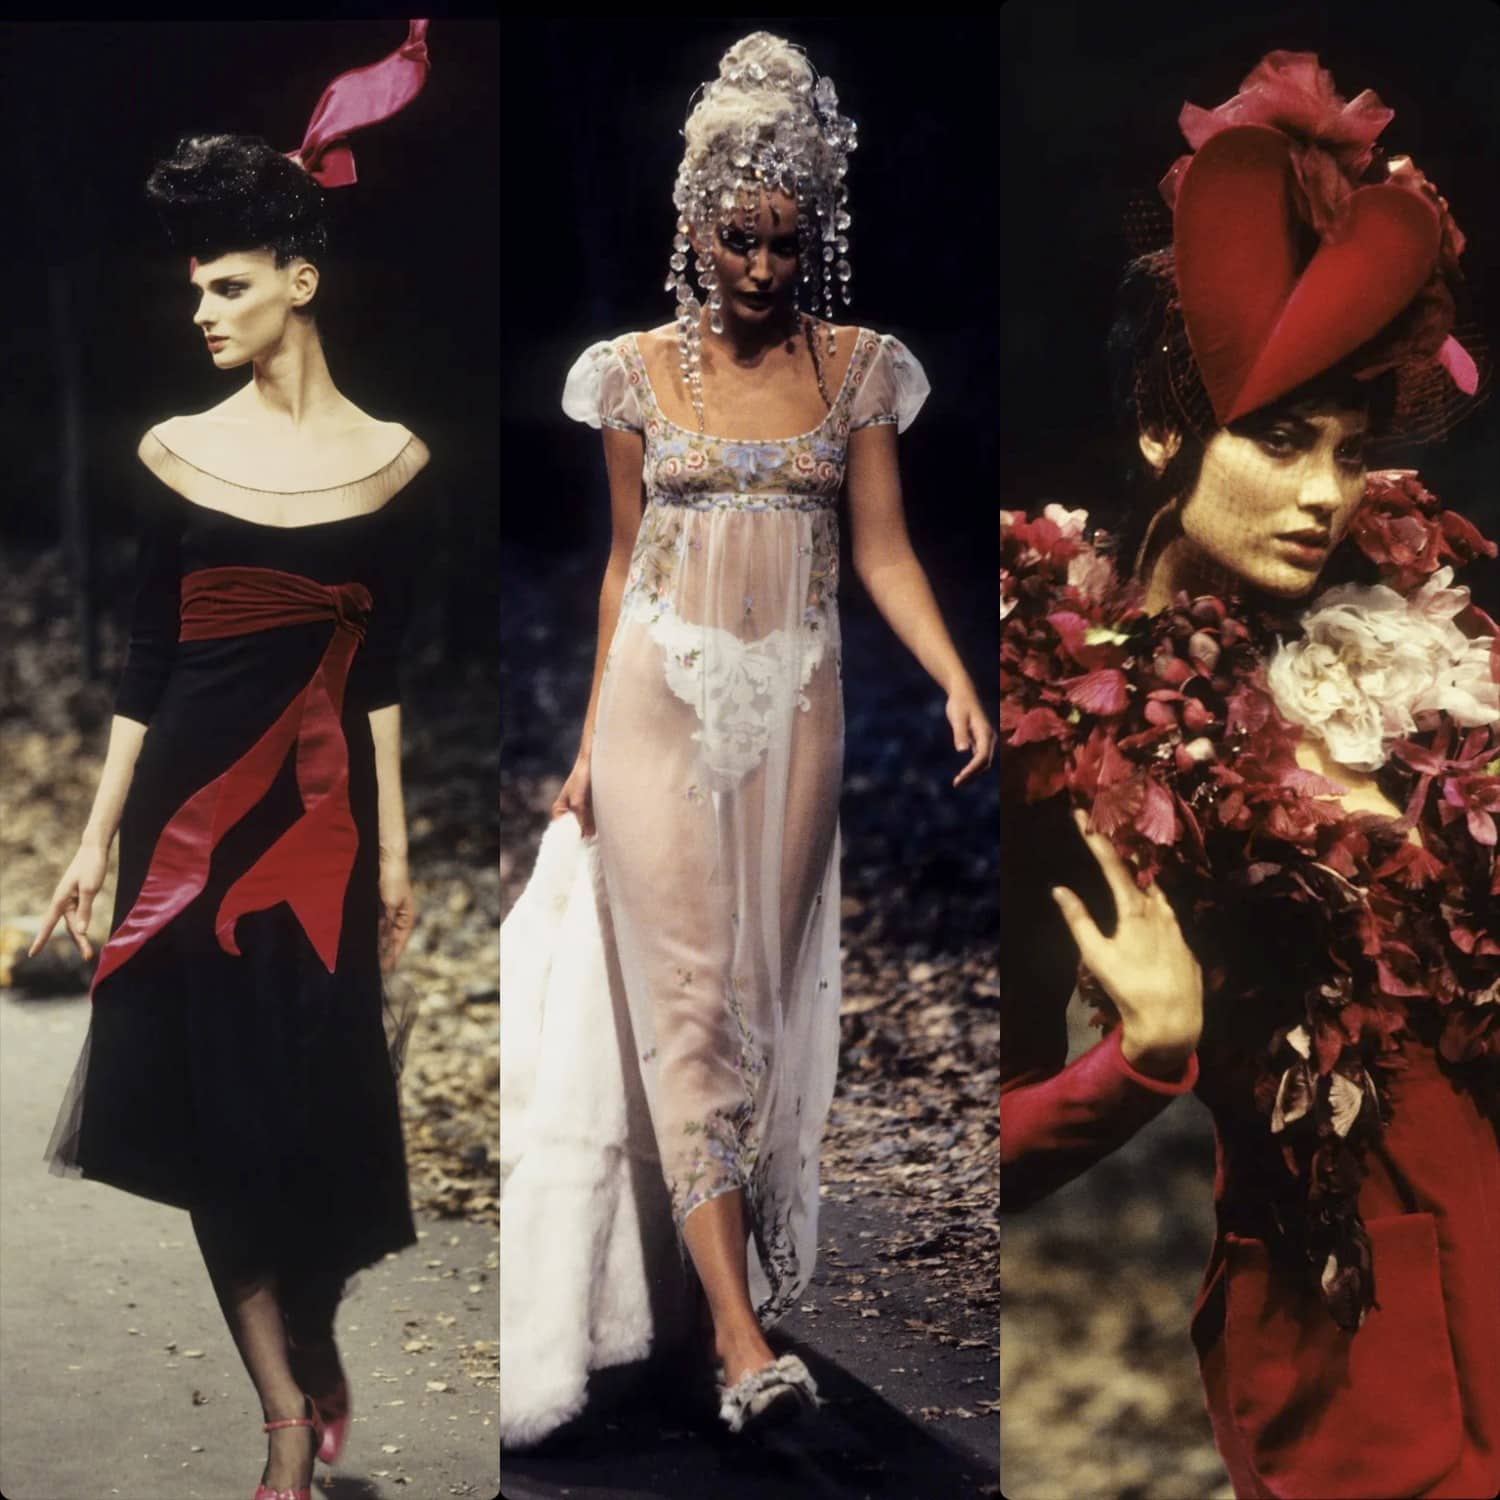 GIVENCHY HAUTE COUTURE Fall 1997 by - Unforgettable Runway